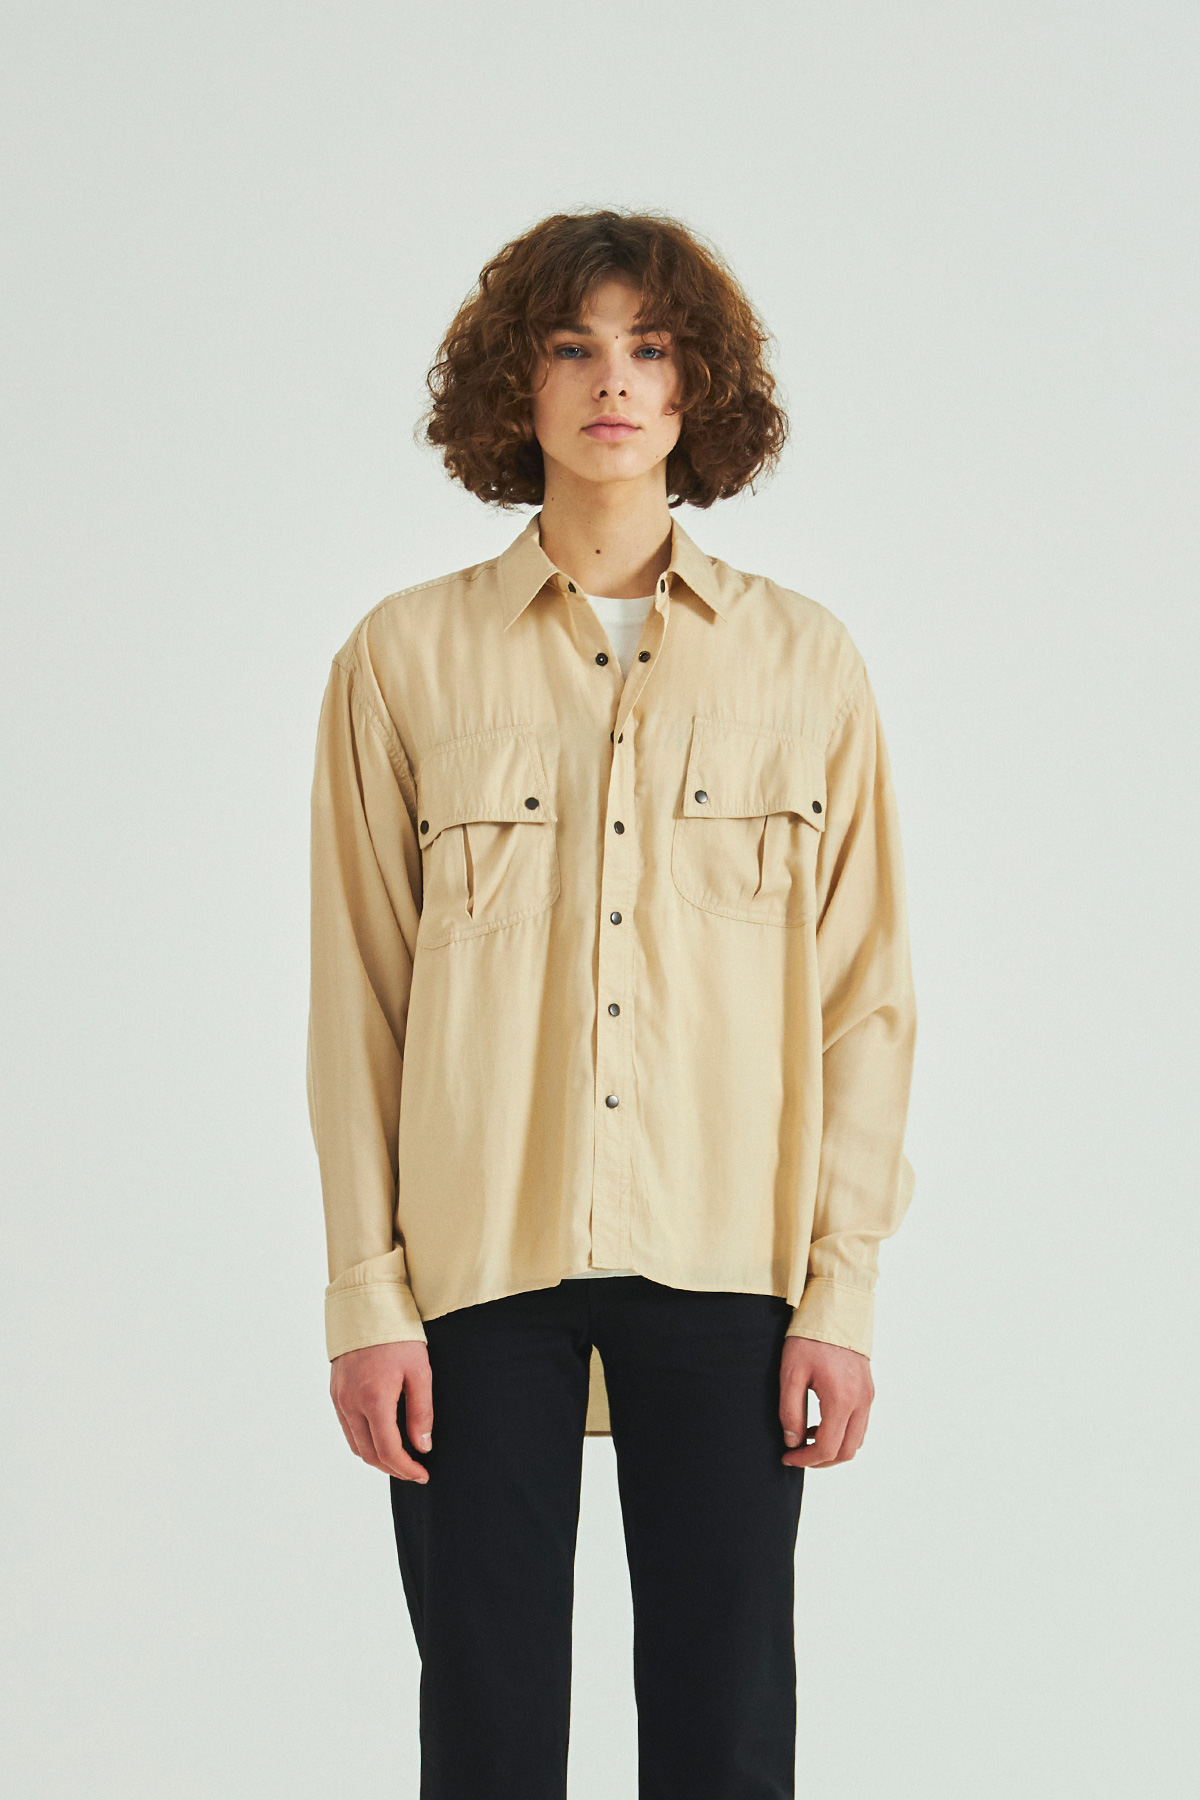 LOOSE FIT MILLITARY SHIRT BEIGE